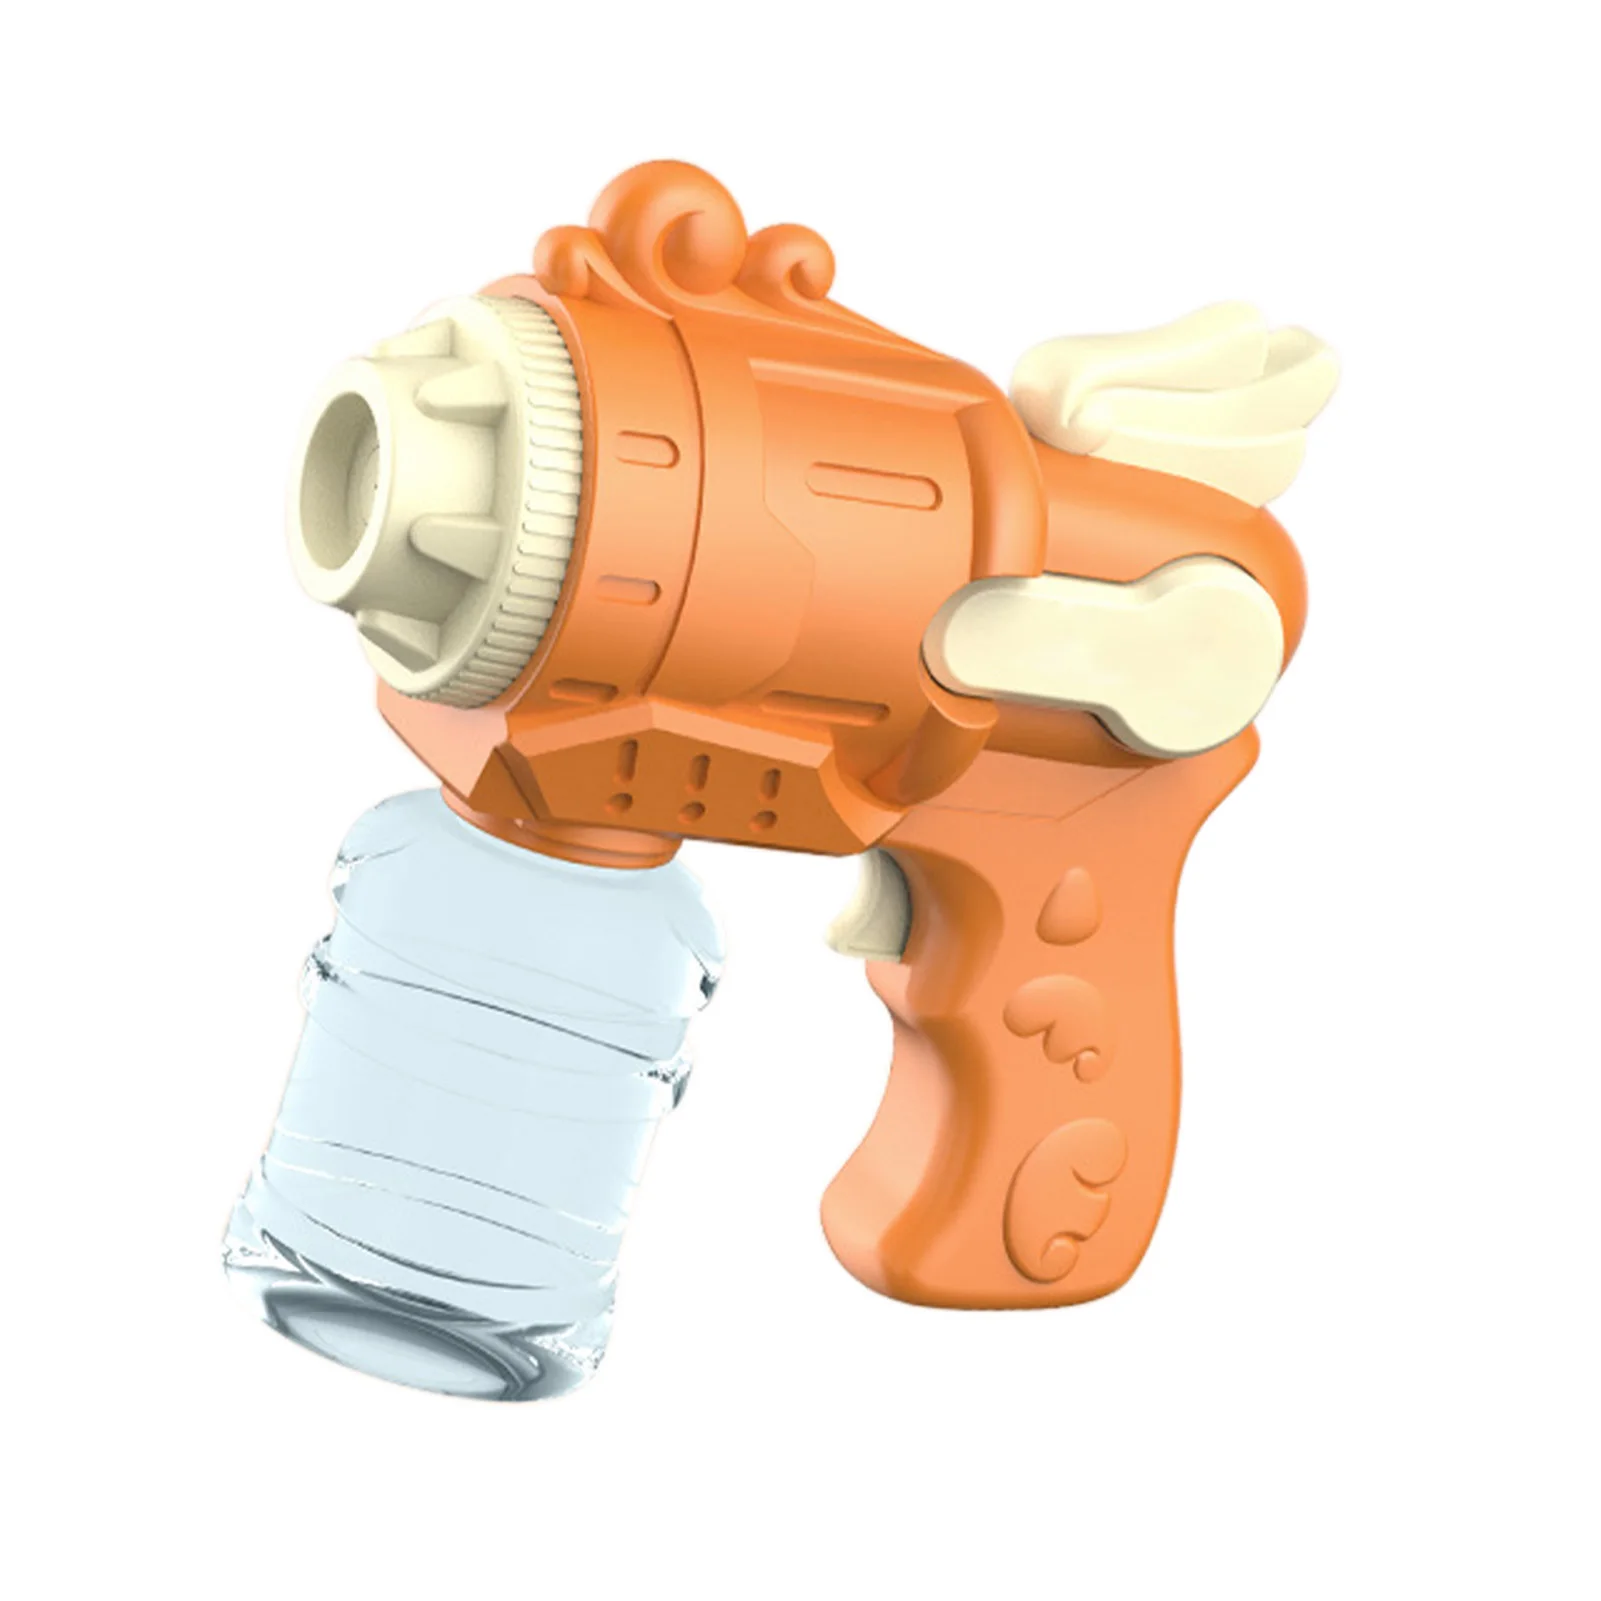 

Water Squirt Guns For Kids Toddlers Long Shooting Range Water Guns Spray Toy Cartoon Angel Wings Super Water Squirt For Boys And